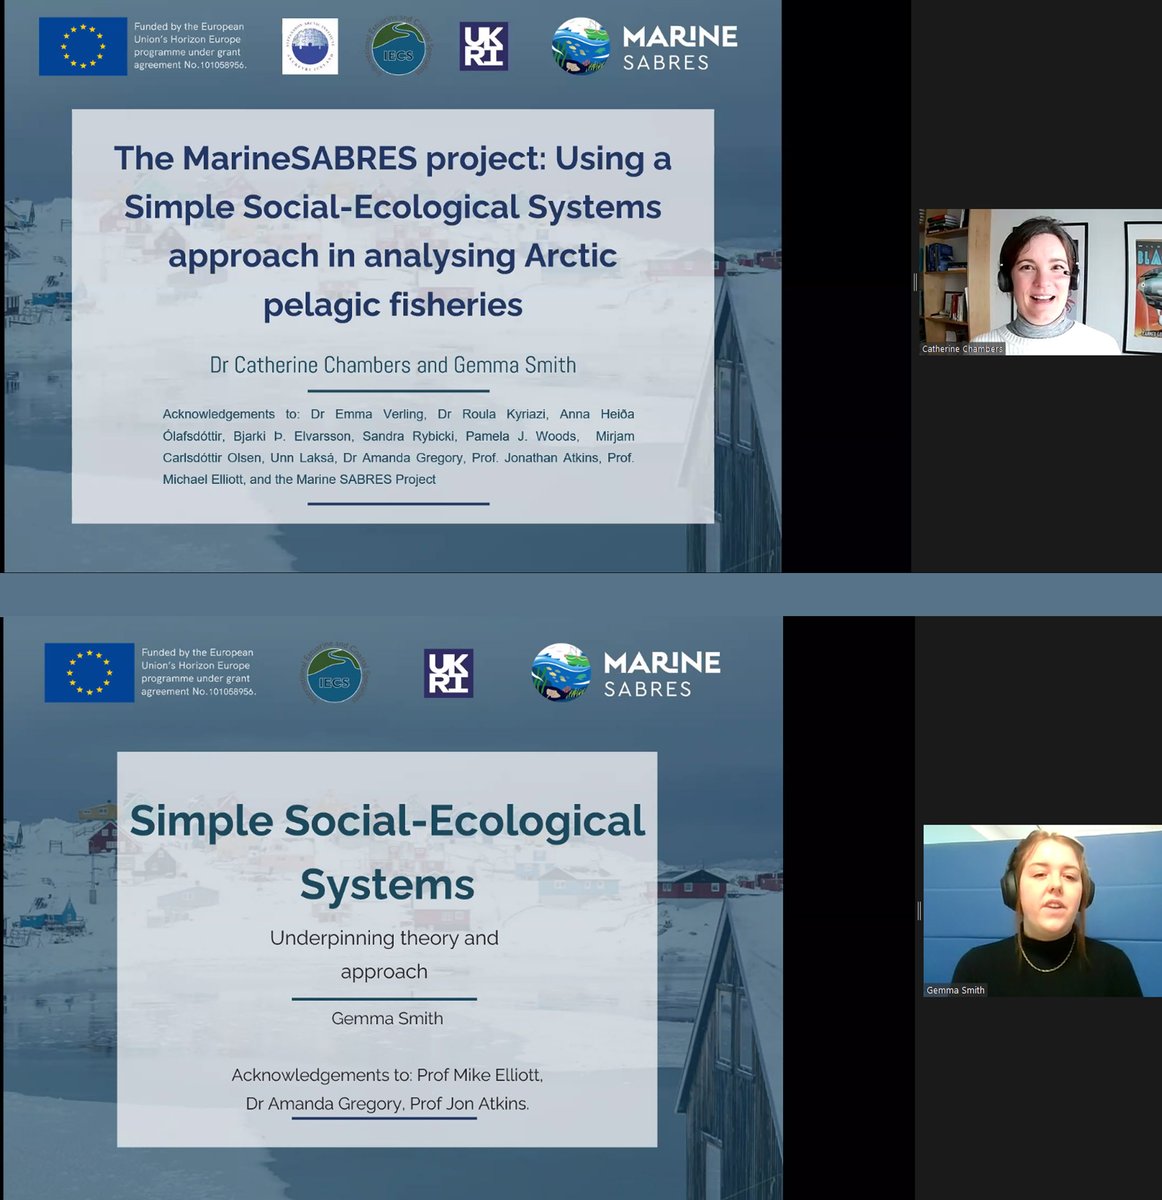 Huge thanks to Catherine Chambers & Gemma Smith for a fantastic & engaging hour on all things #MARINEsabres yesterday! Playback of Atlantic & Arctic Lighthouse Weekly Hour available at bit.ly/49p8ZCv BlueMissionAA #missionocean @IecsLtd Stefánsson Arctic Institute